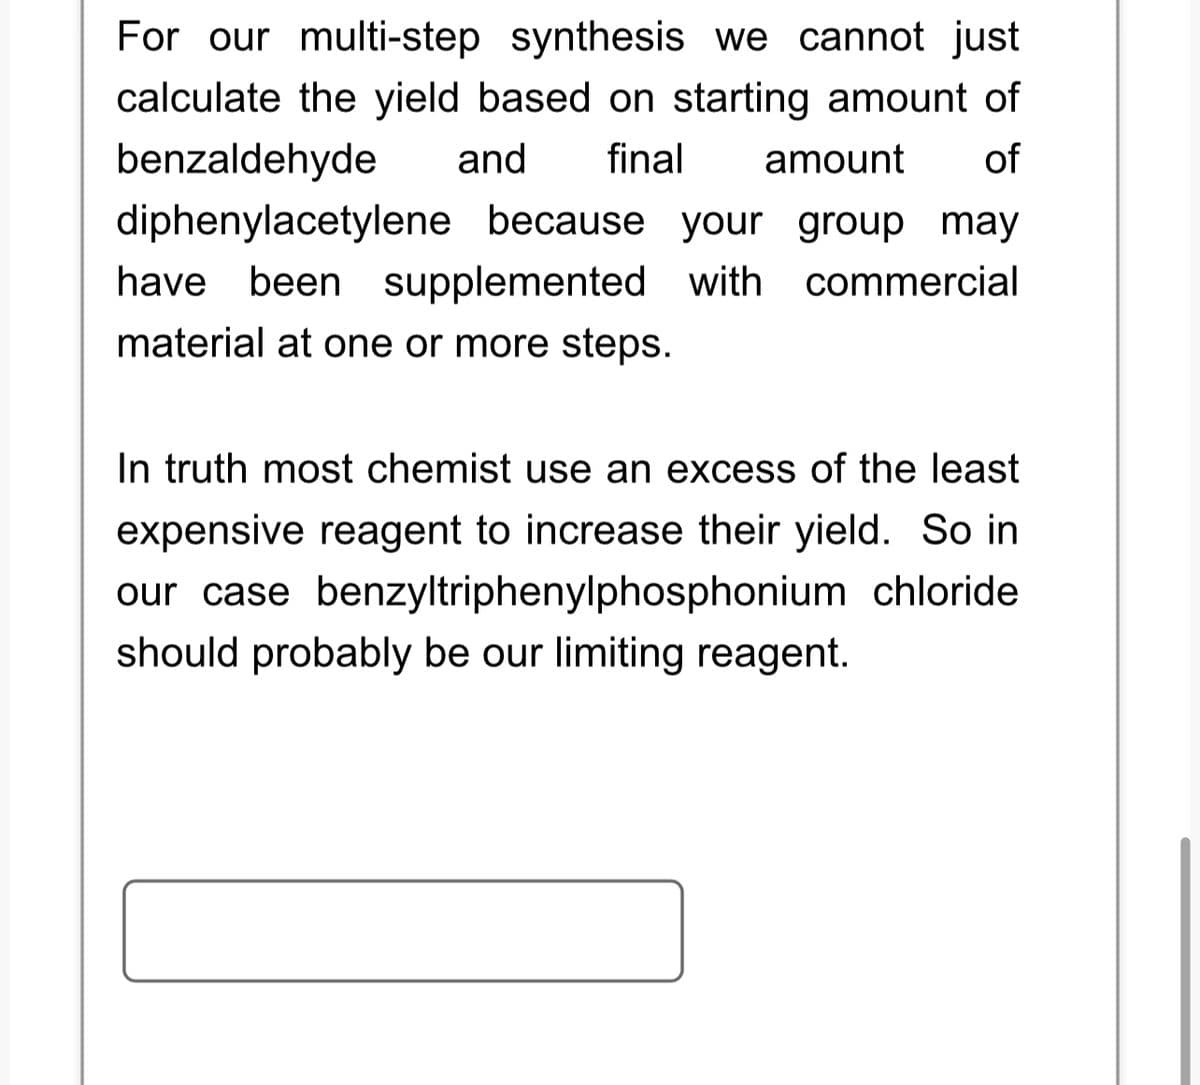 For our multi-step synthesis we cannot just
calculate the yield based on starting amount of
benzaldehyde and final amount of
diphenylacetylene because your group may
have been supplemented with commercial
material at one or more steps.
In truth most chemist use an excess of the least
expensive reagent to increase their yield. So in
our case benzyltriphenylphosphonium chloride
should probably be our limiting reagent.